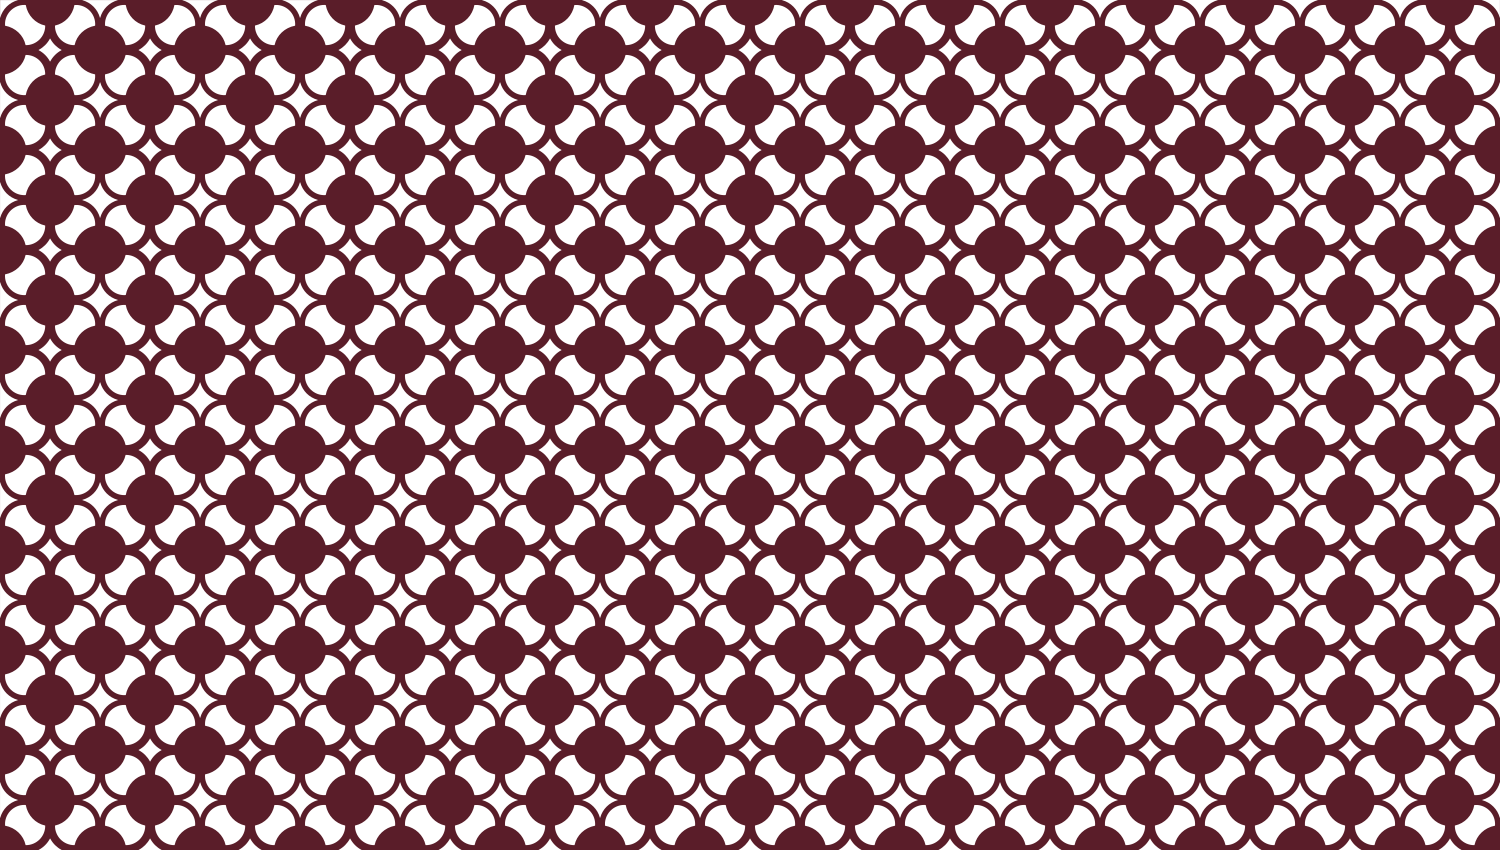 Parasoleil™ Geode© pattern displayed with a burgundy color overlay